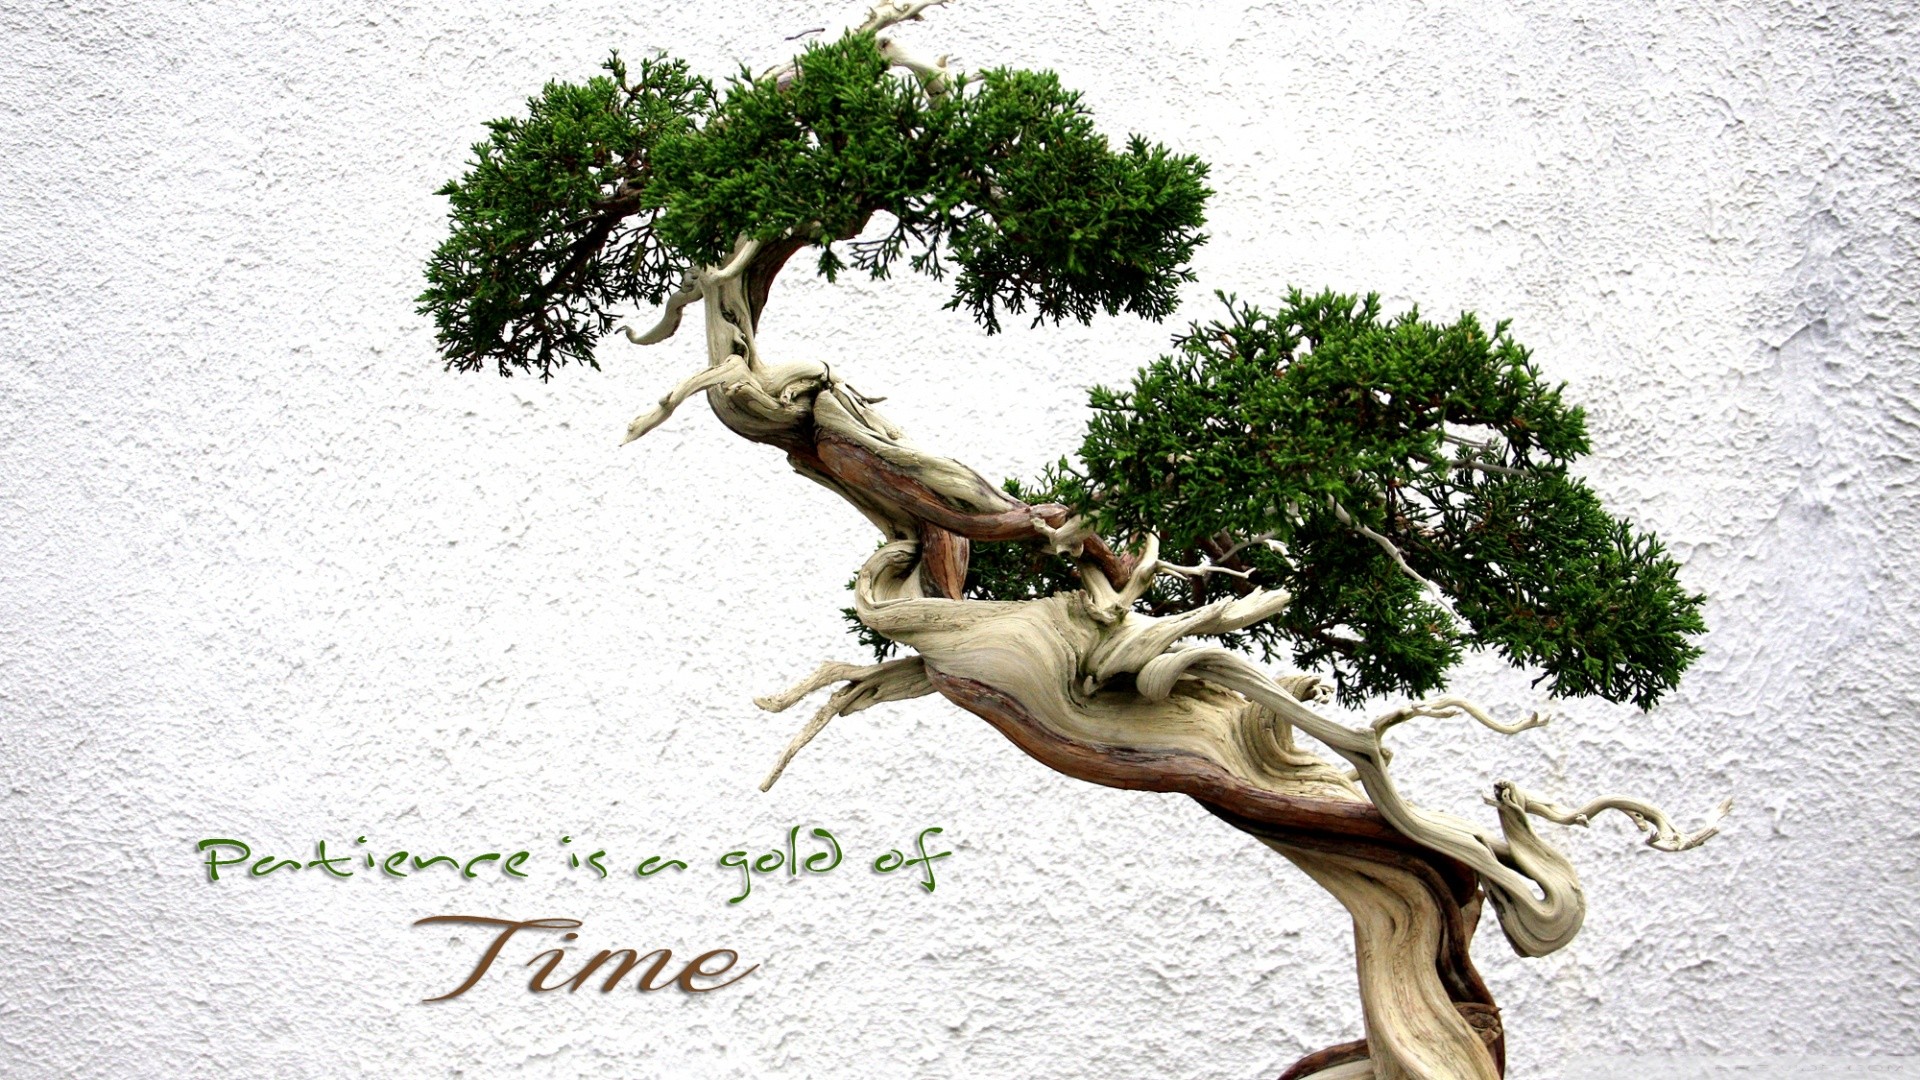 trees, Gold, Patience, Time Wallpaper